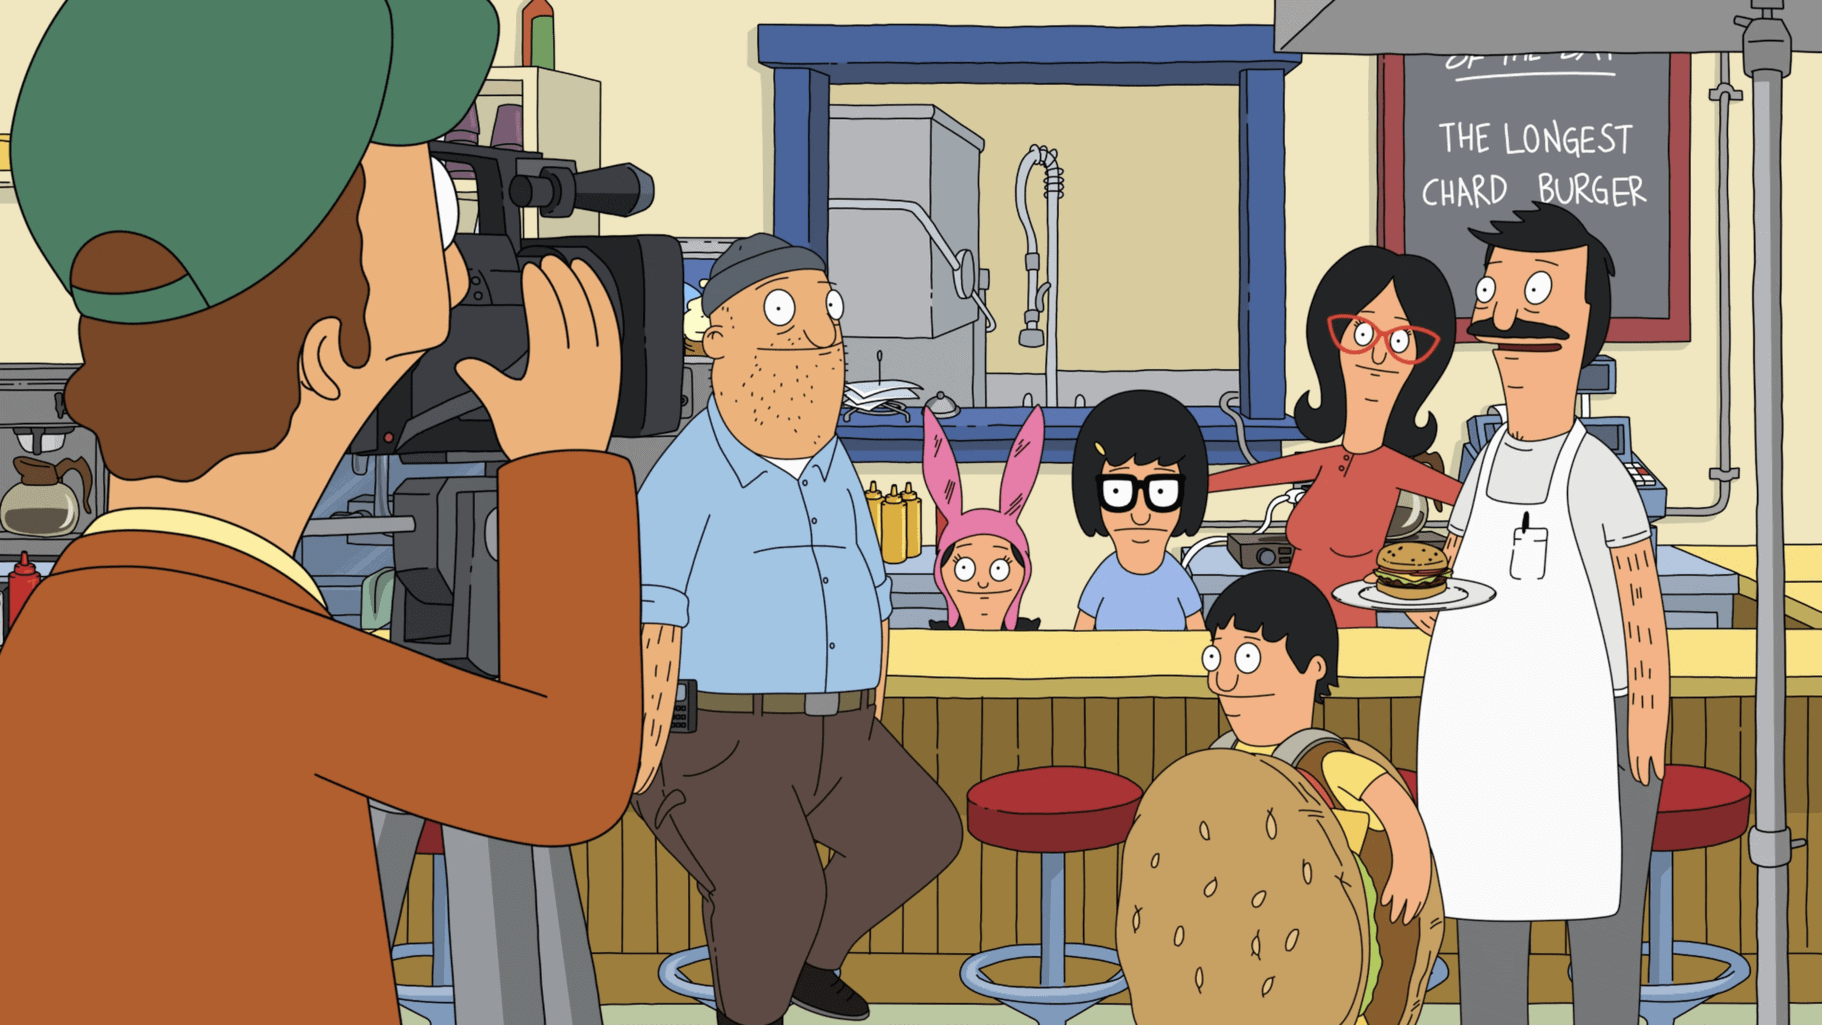 An animated man shoots a TV commercial inside a restaurant in this image from Wilo Productions.